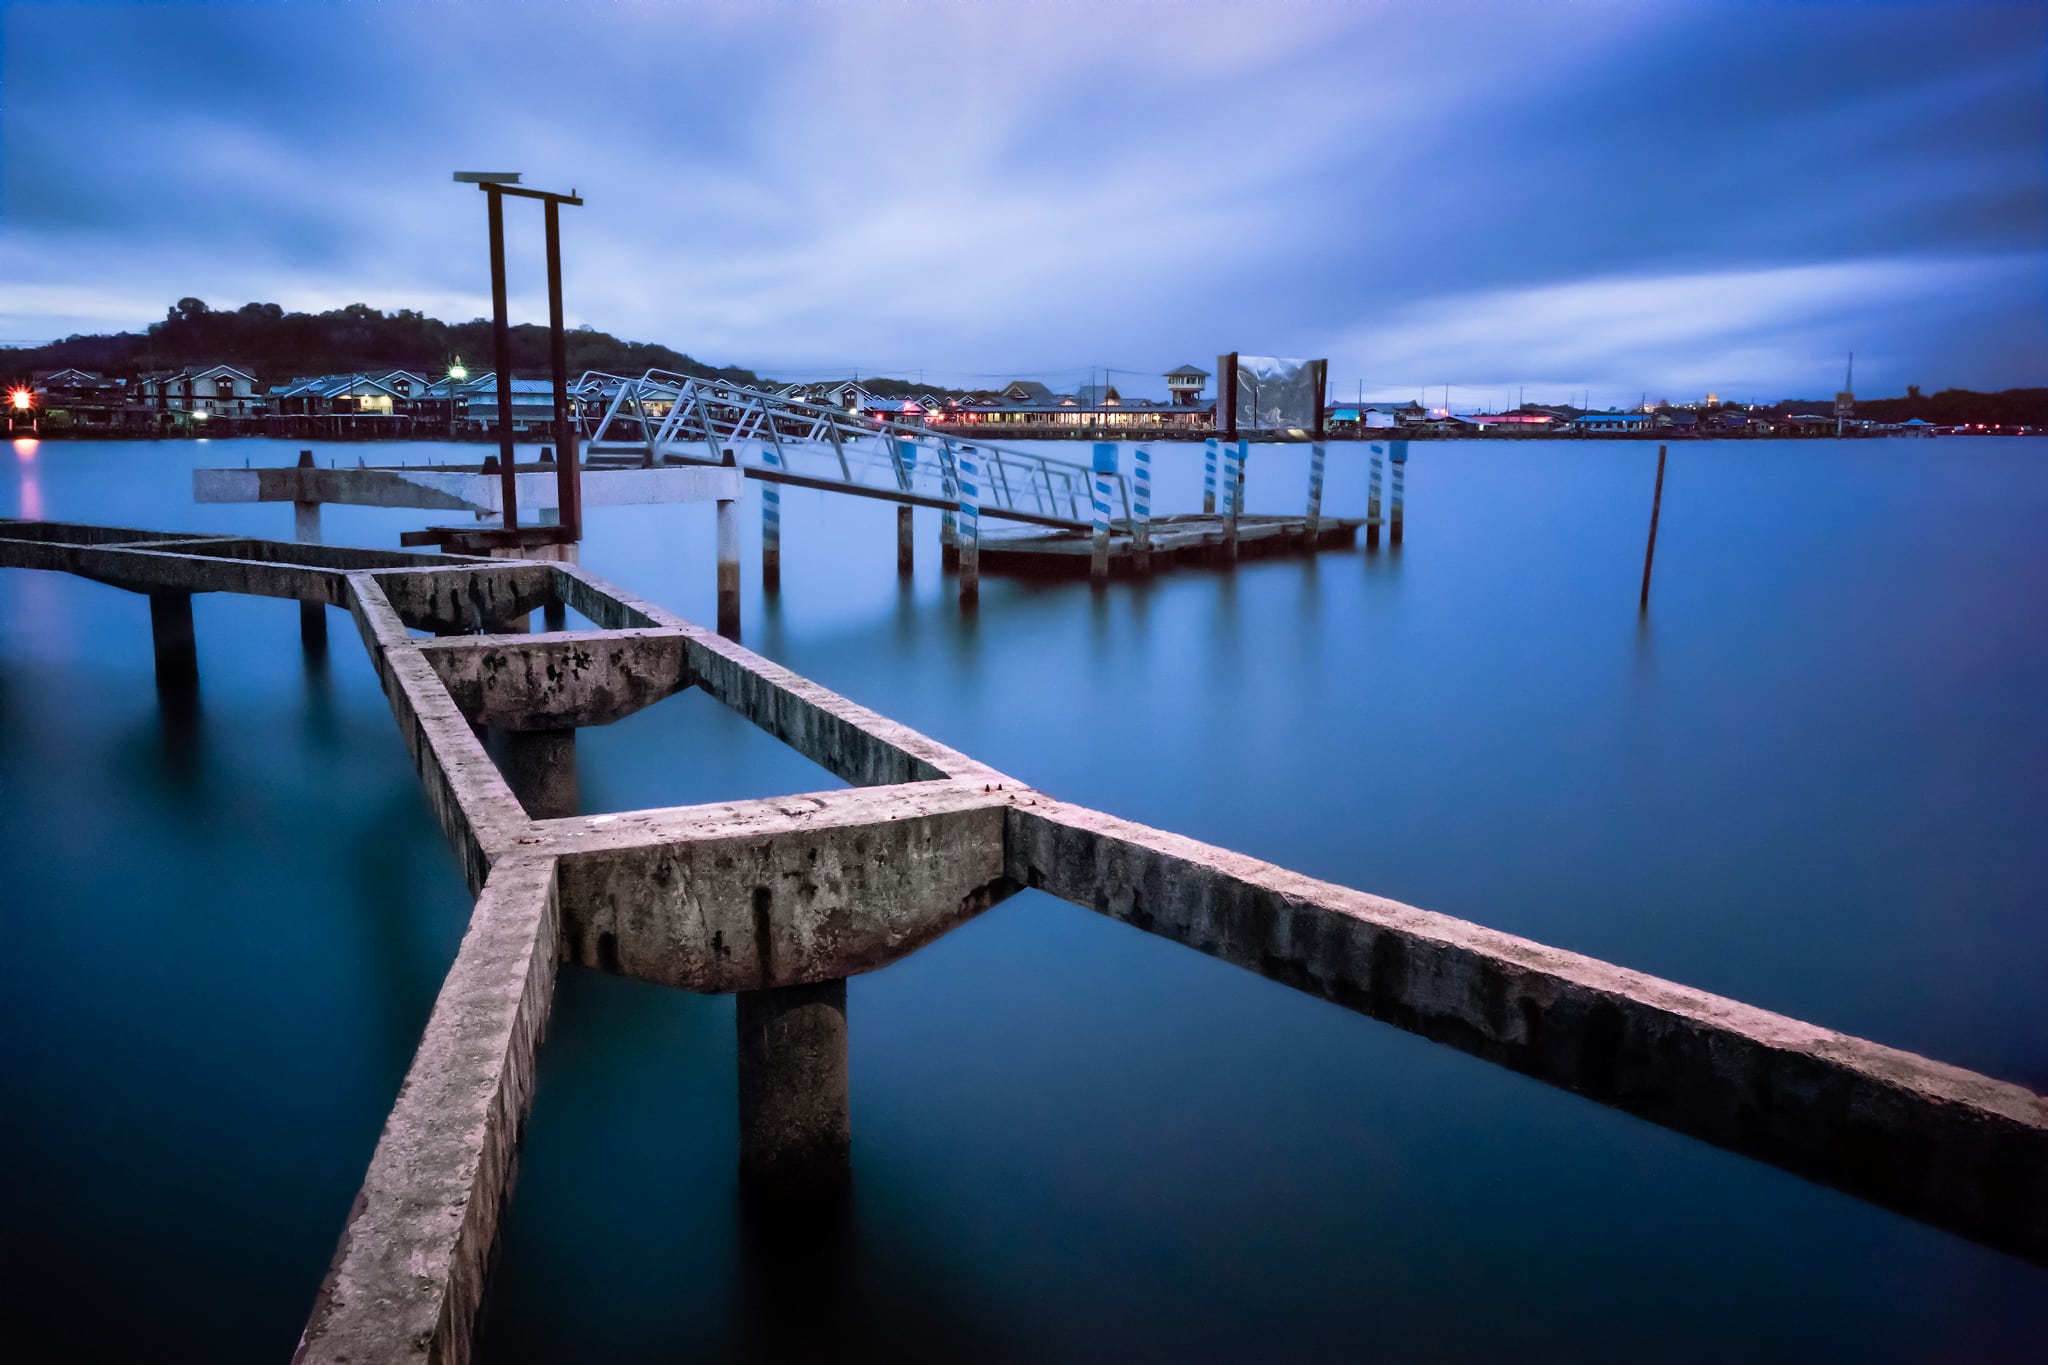 Old pier at the waterfront with silky water because of the long exposure. Bandar Seri Begawan, Brunei.